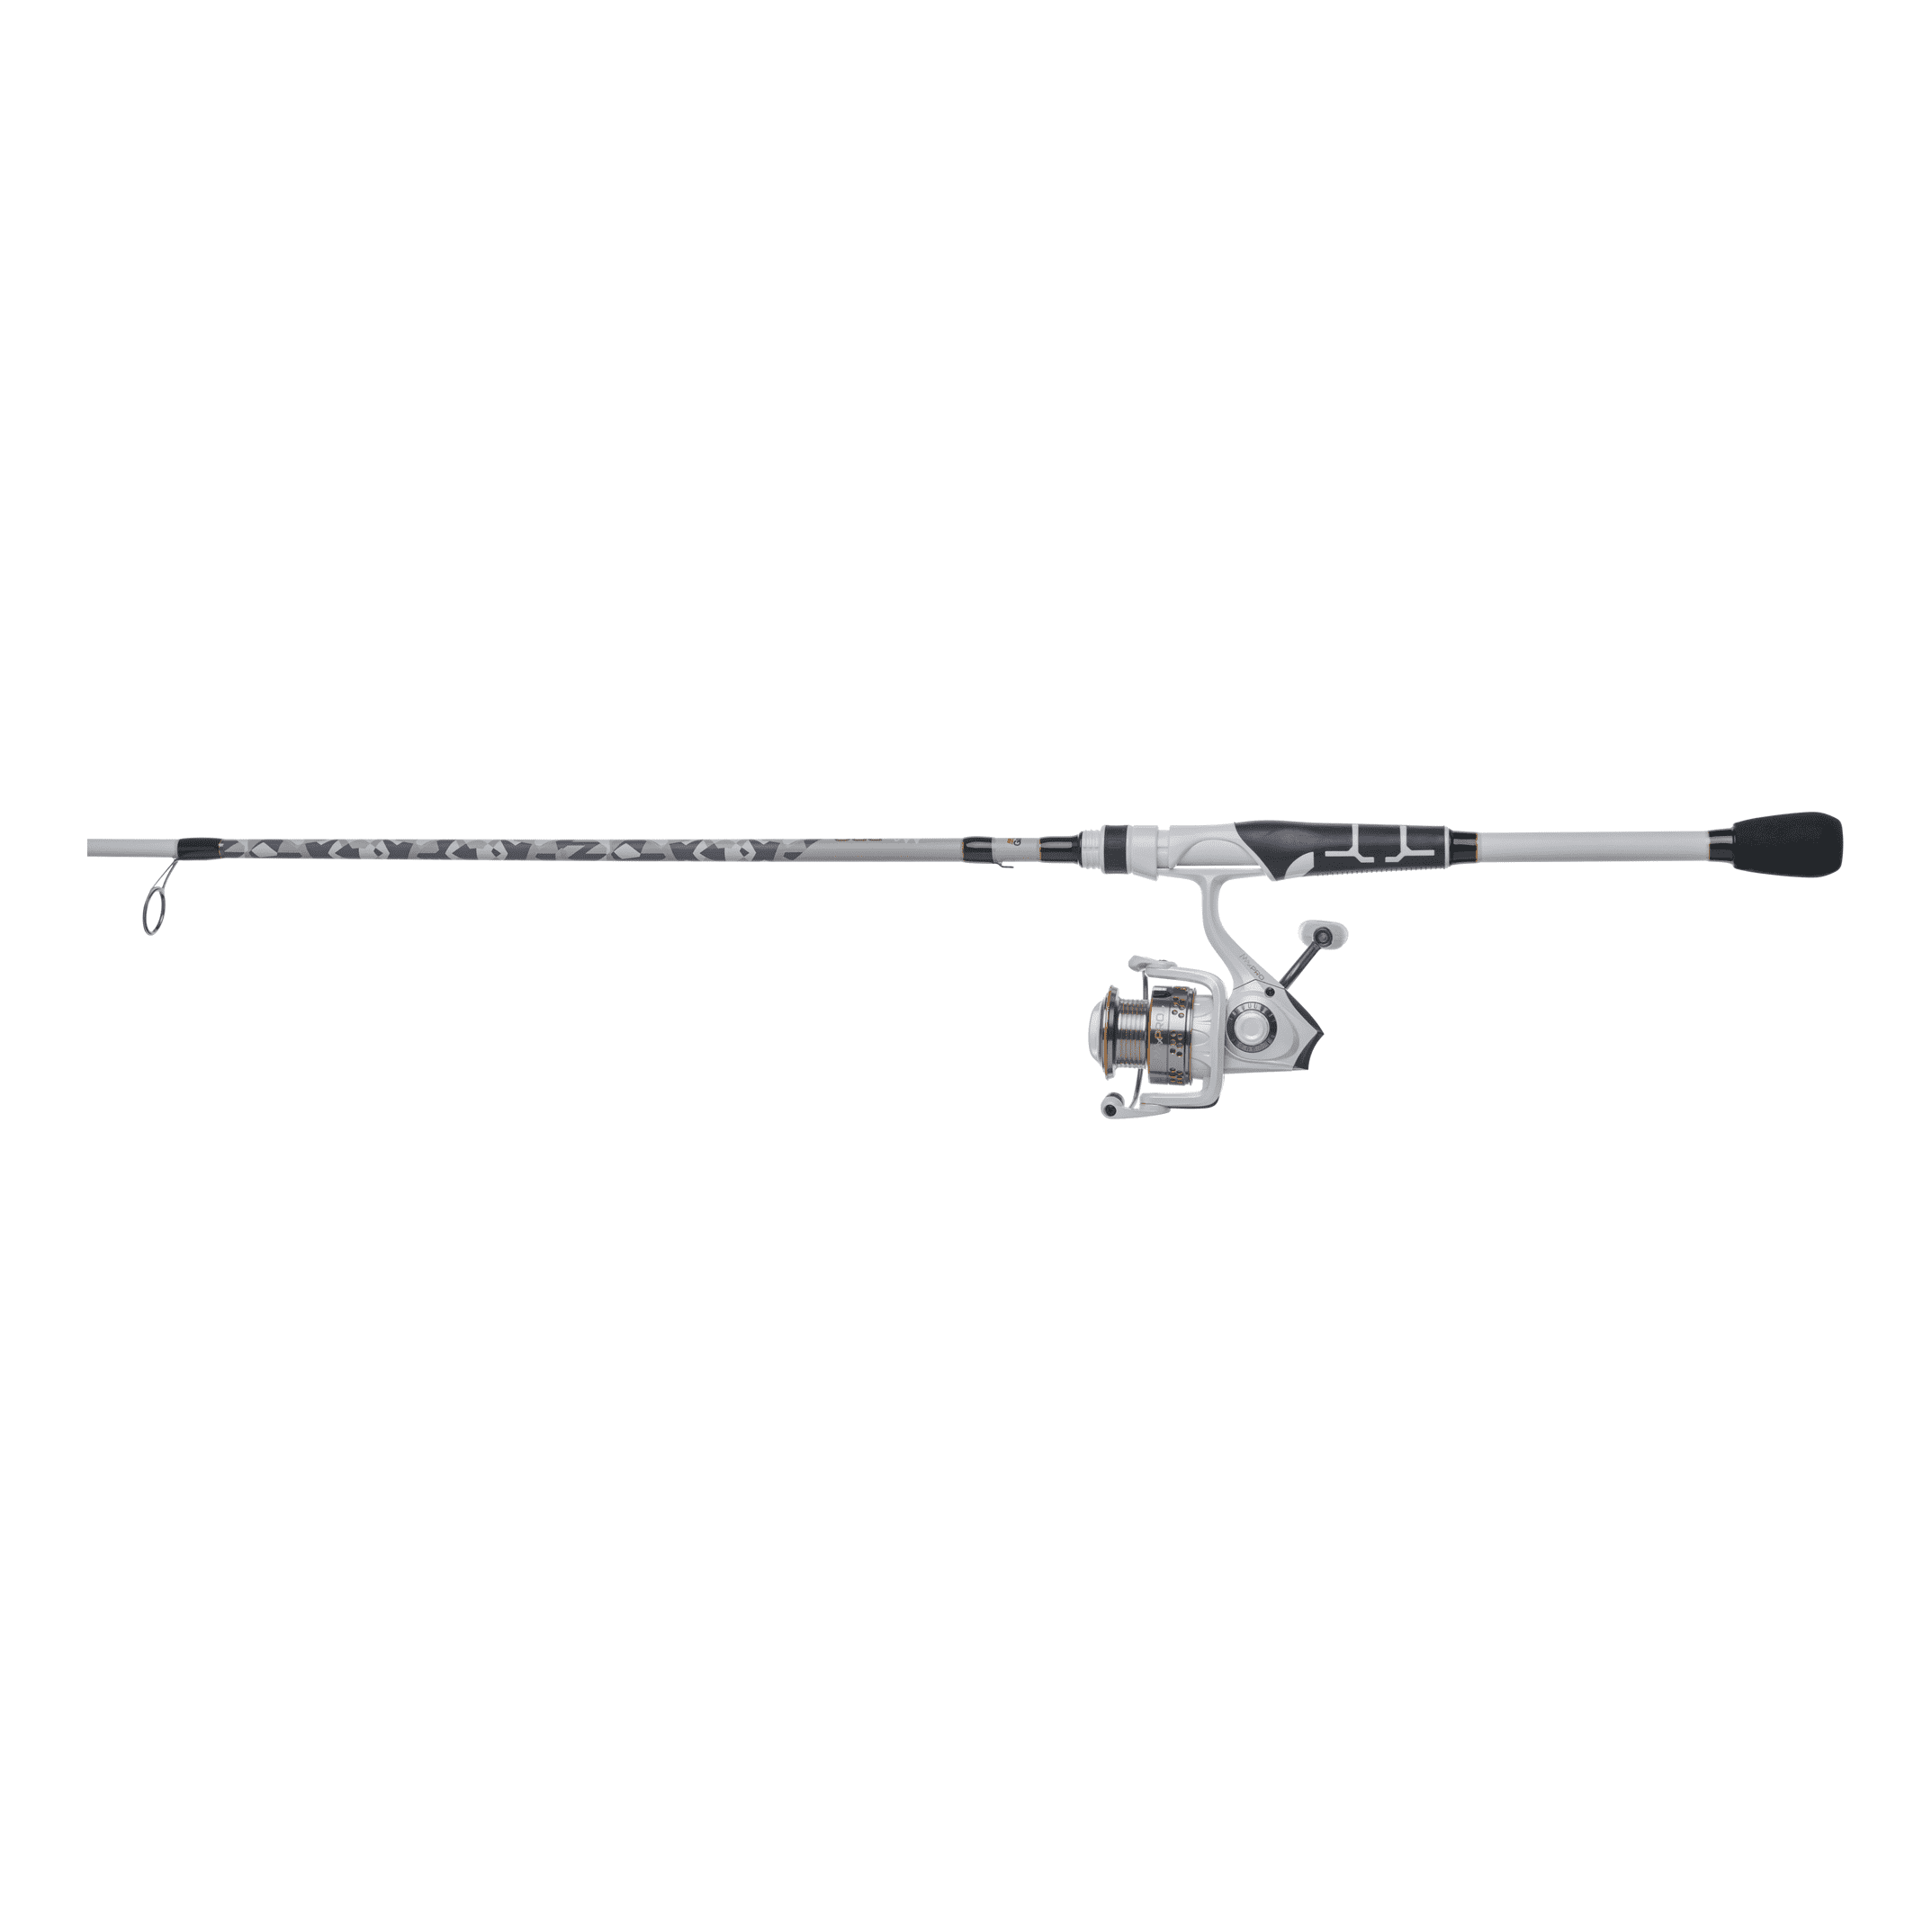 Shakespeare Ugly Stik GX2 Spinning Combo, 35-Sz Reel, 3BB + 1RB, 6' 6 -  Backcountry Supplies